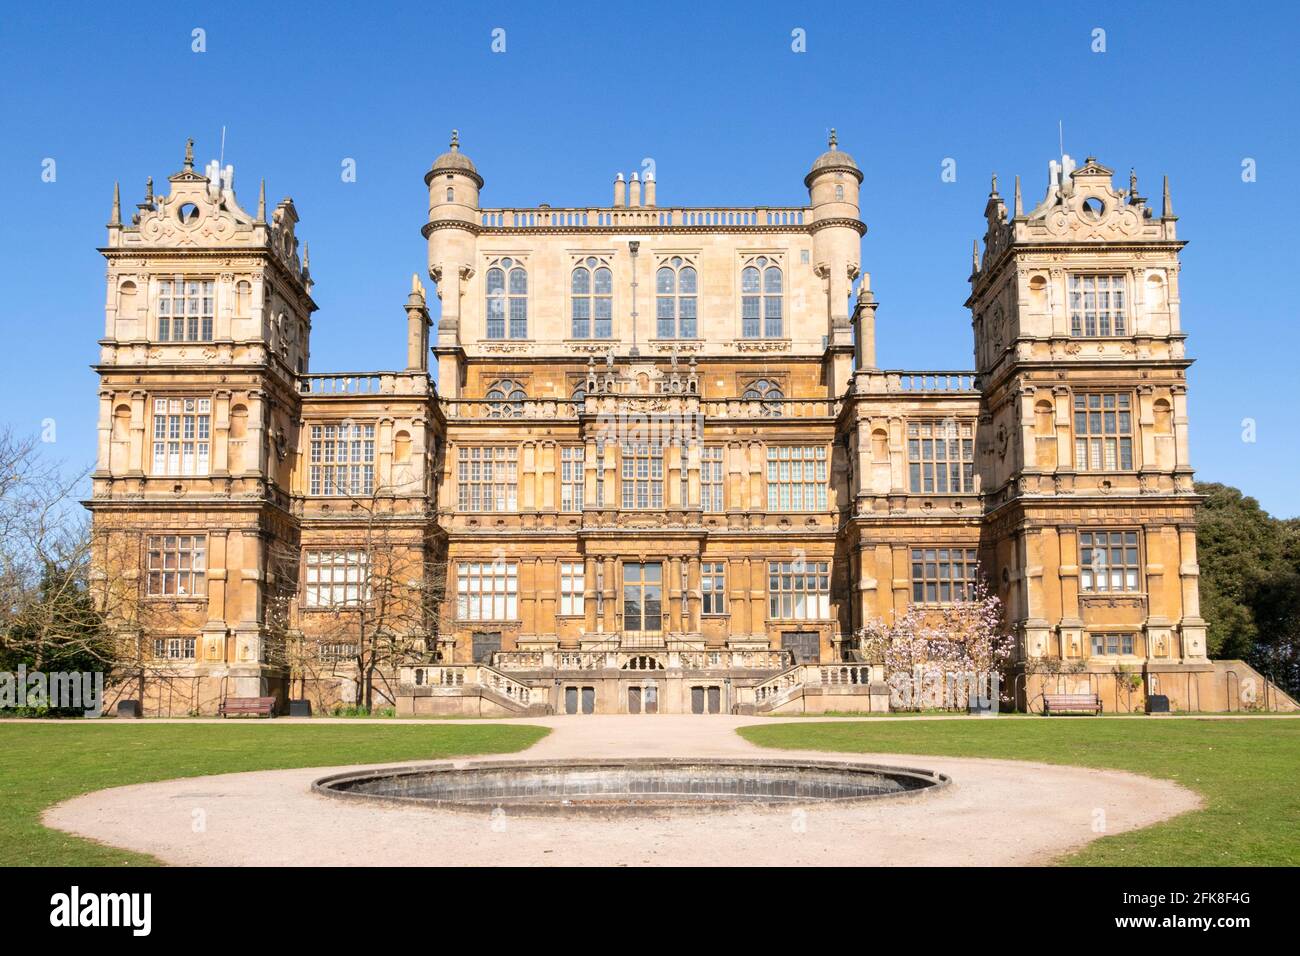 Wollaton Hall Museum Wollaton Park Nottingham Notinghamshire Angleterre GB Europe Banque D'Images